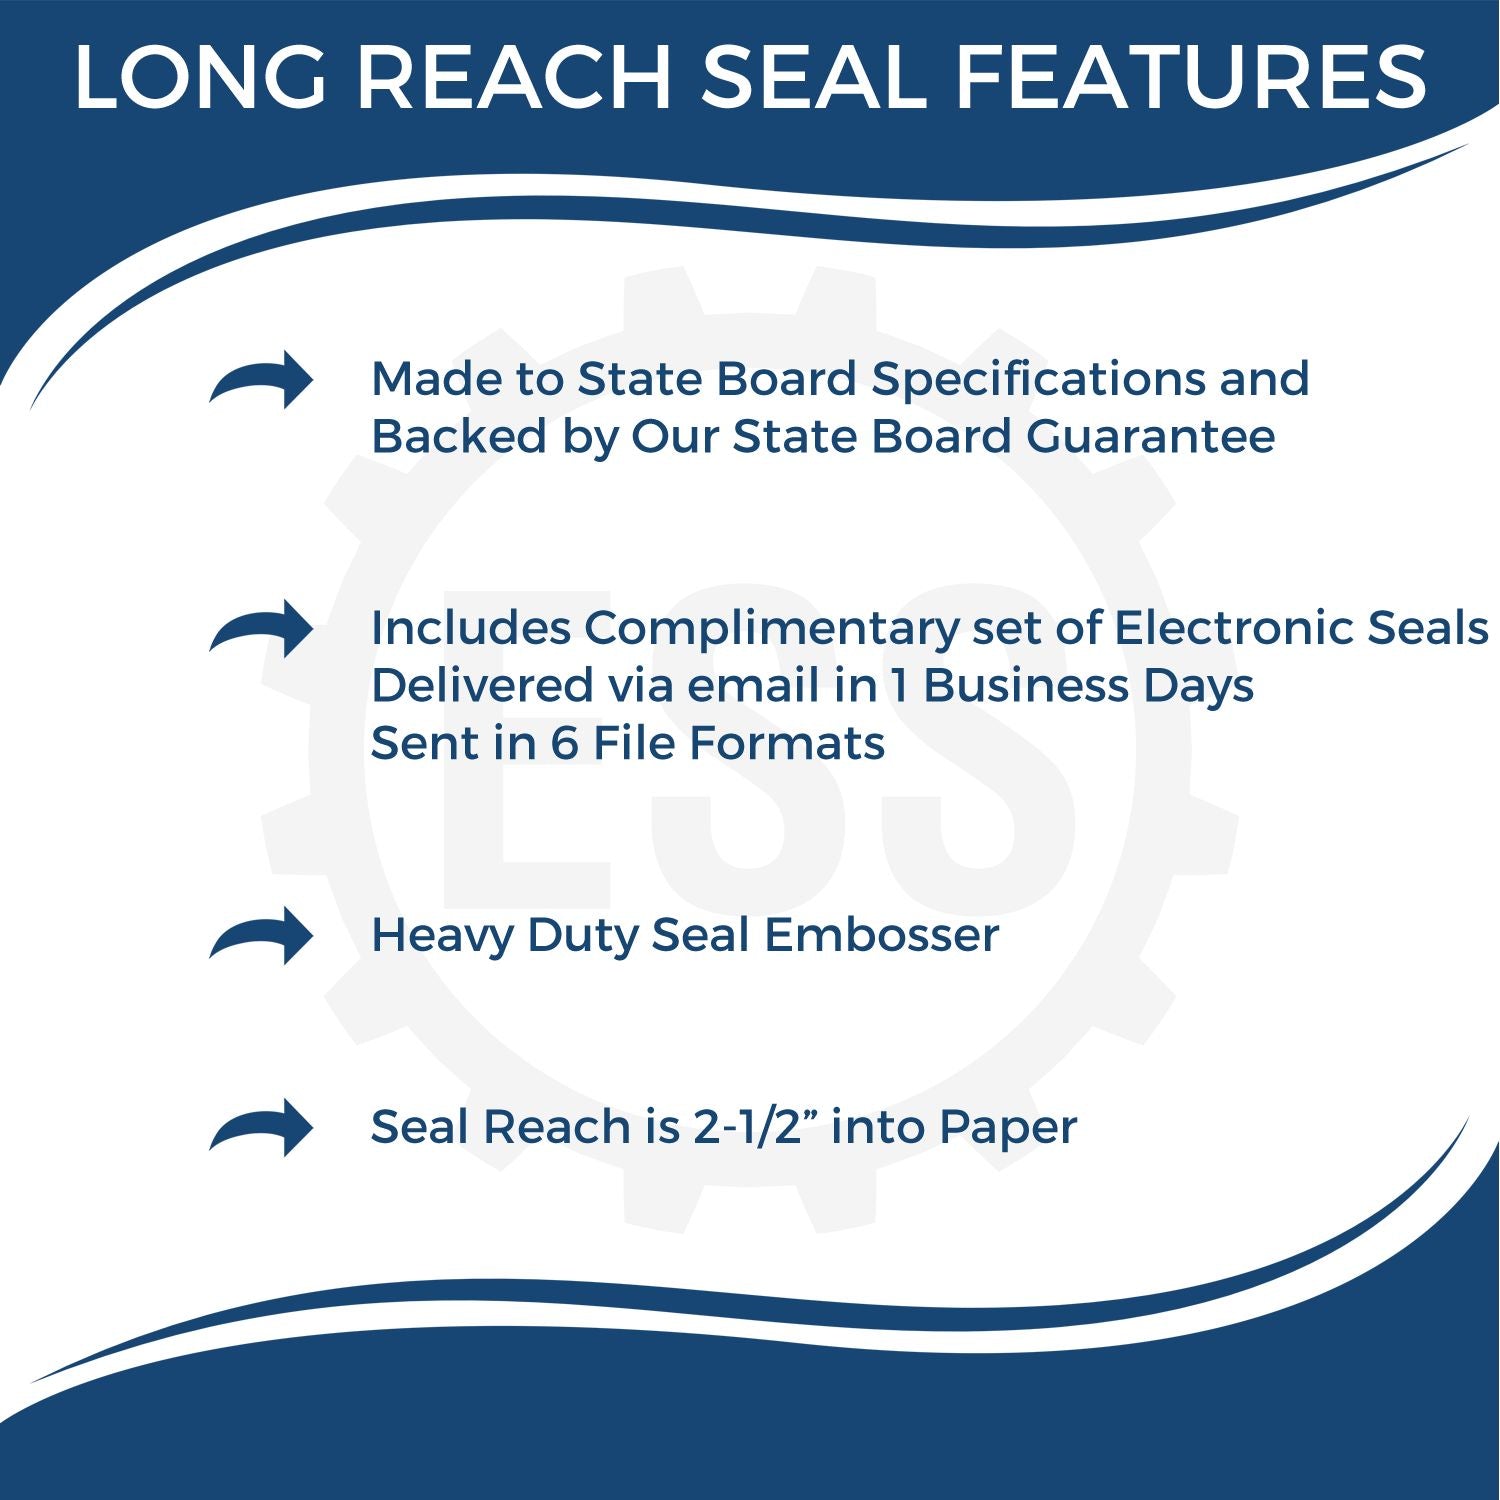 The main image for the Long Reach Georgia PE Seal depicting a sample of the imprint and electronic files